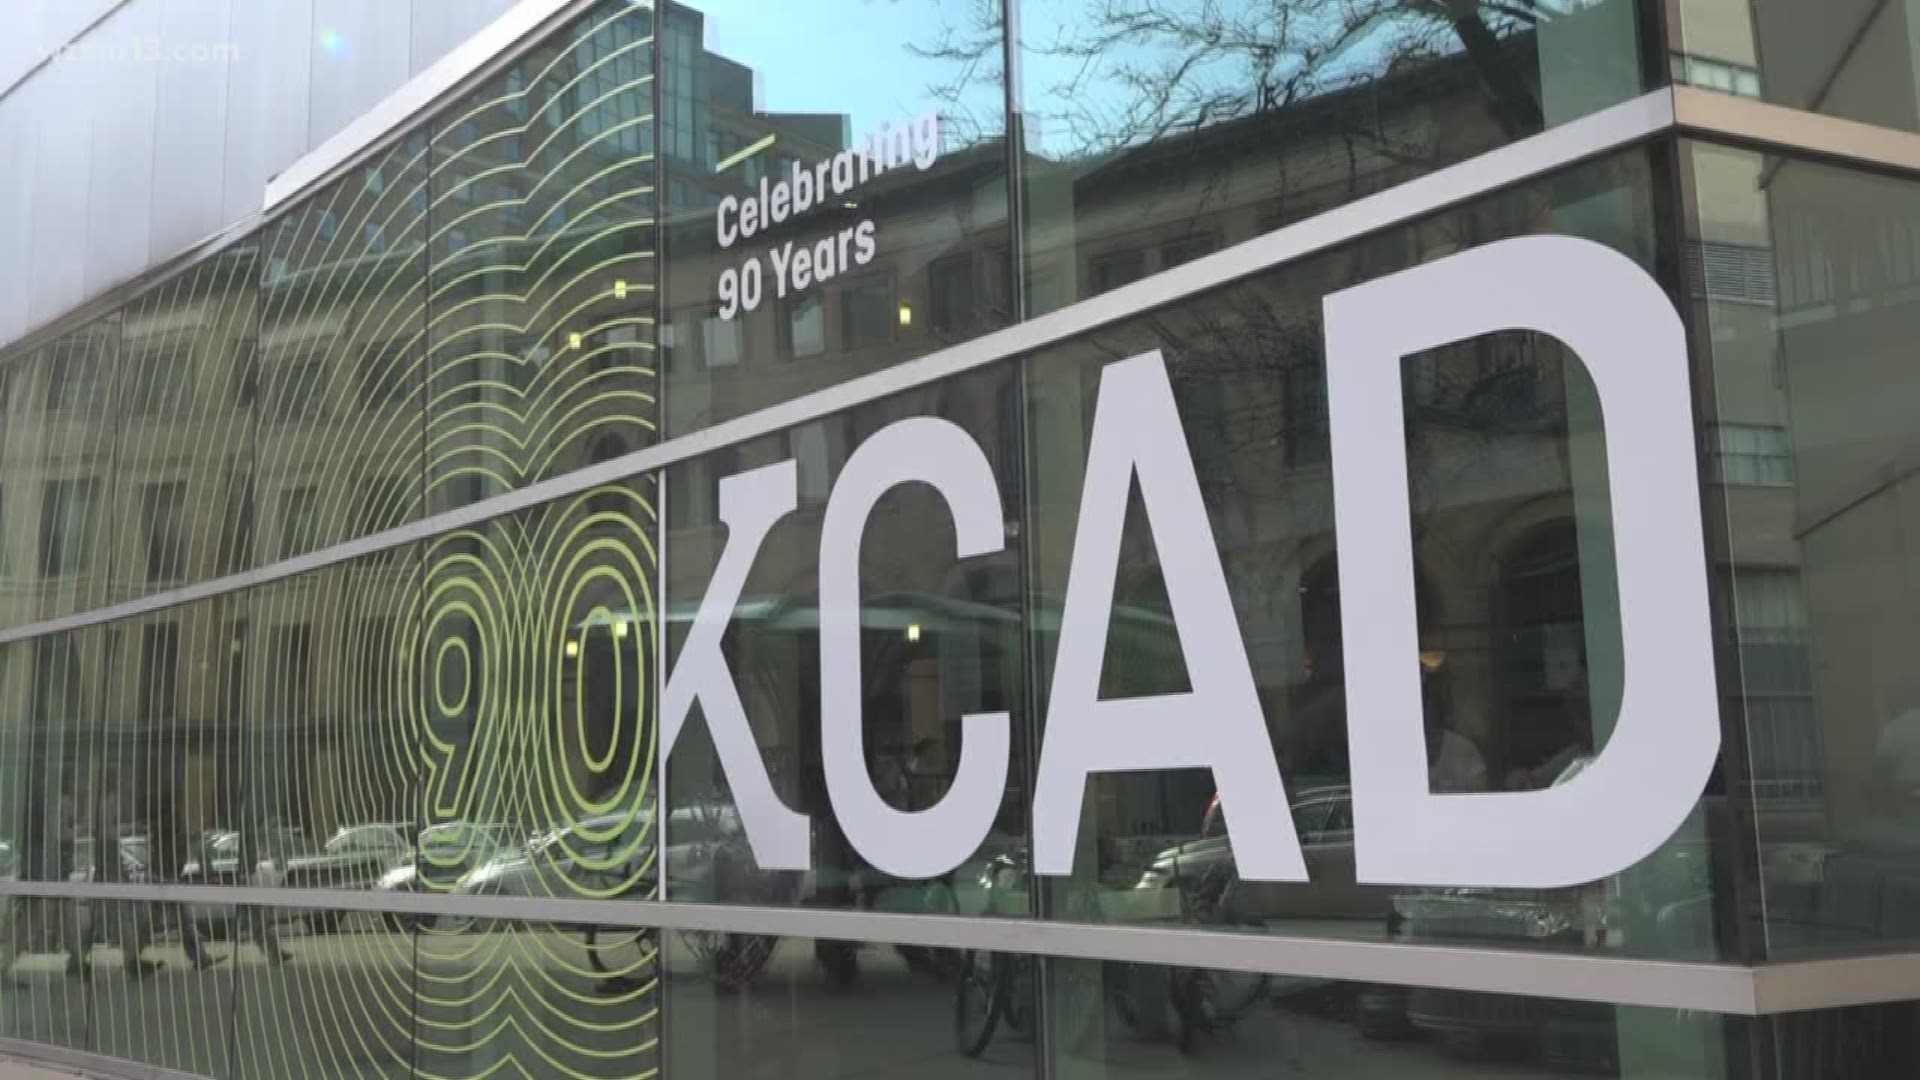 KCAD turns 90, celebrates with exhibition